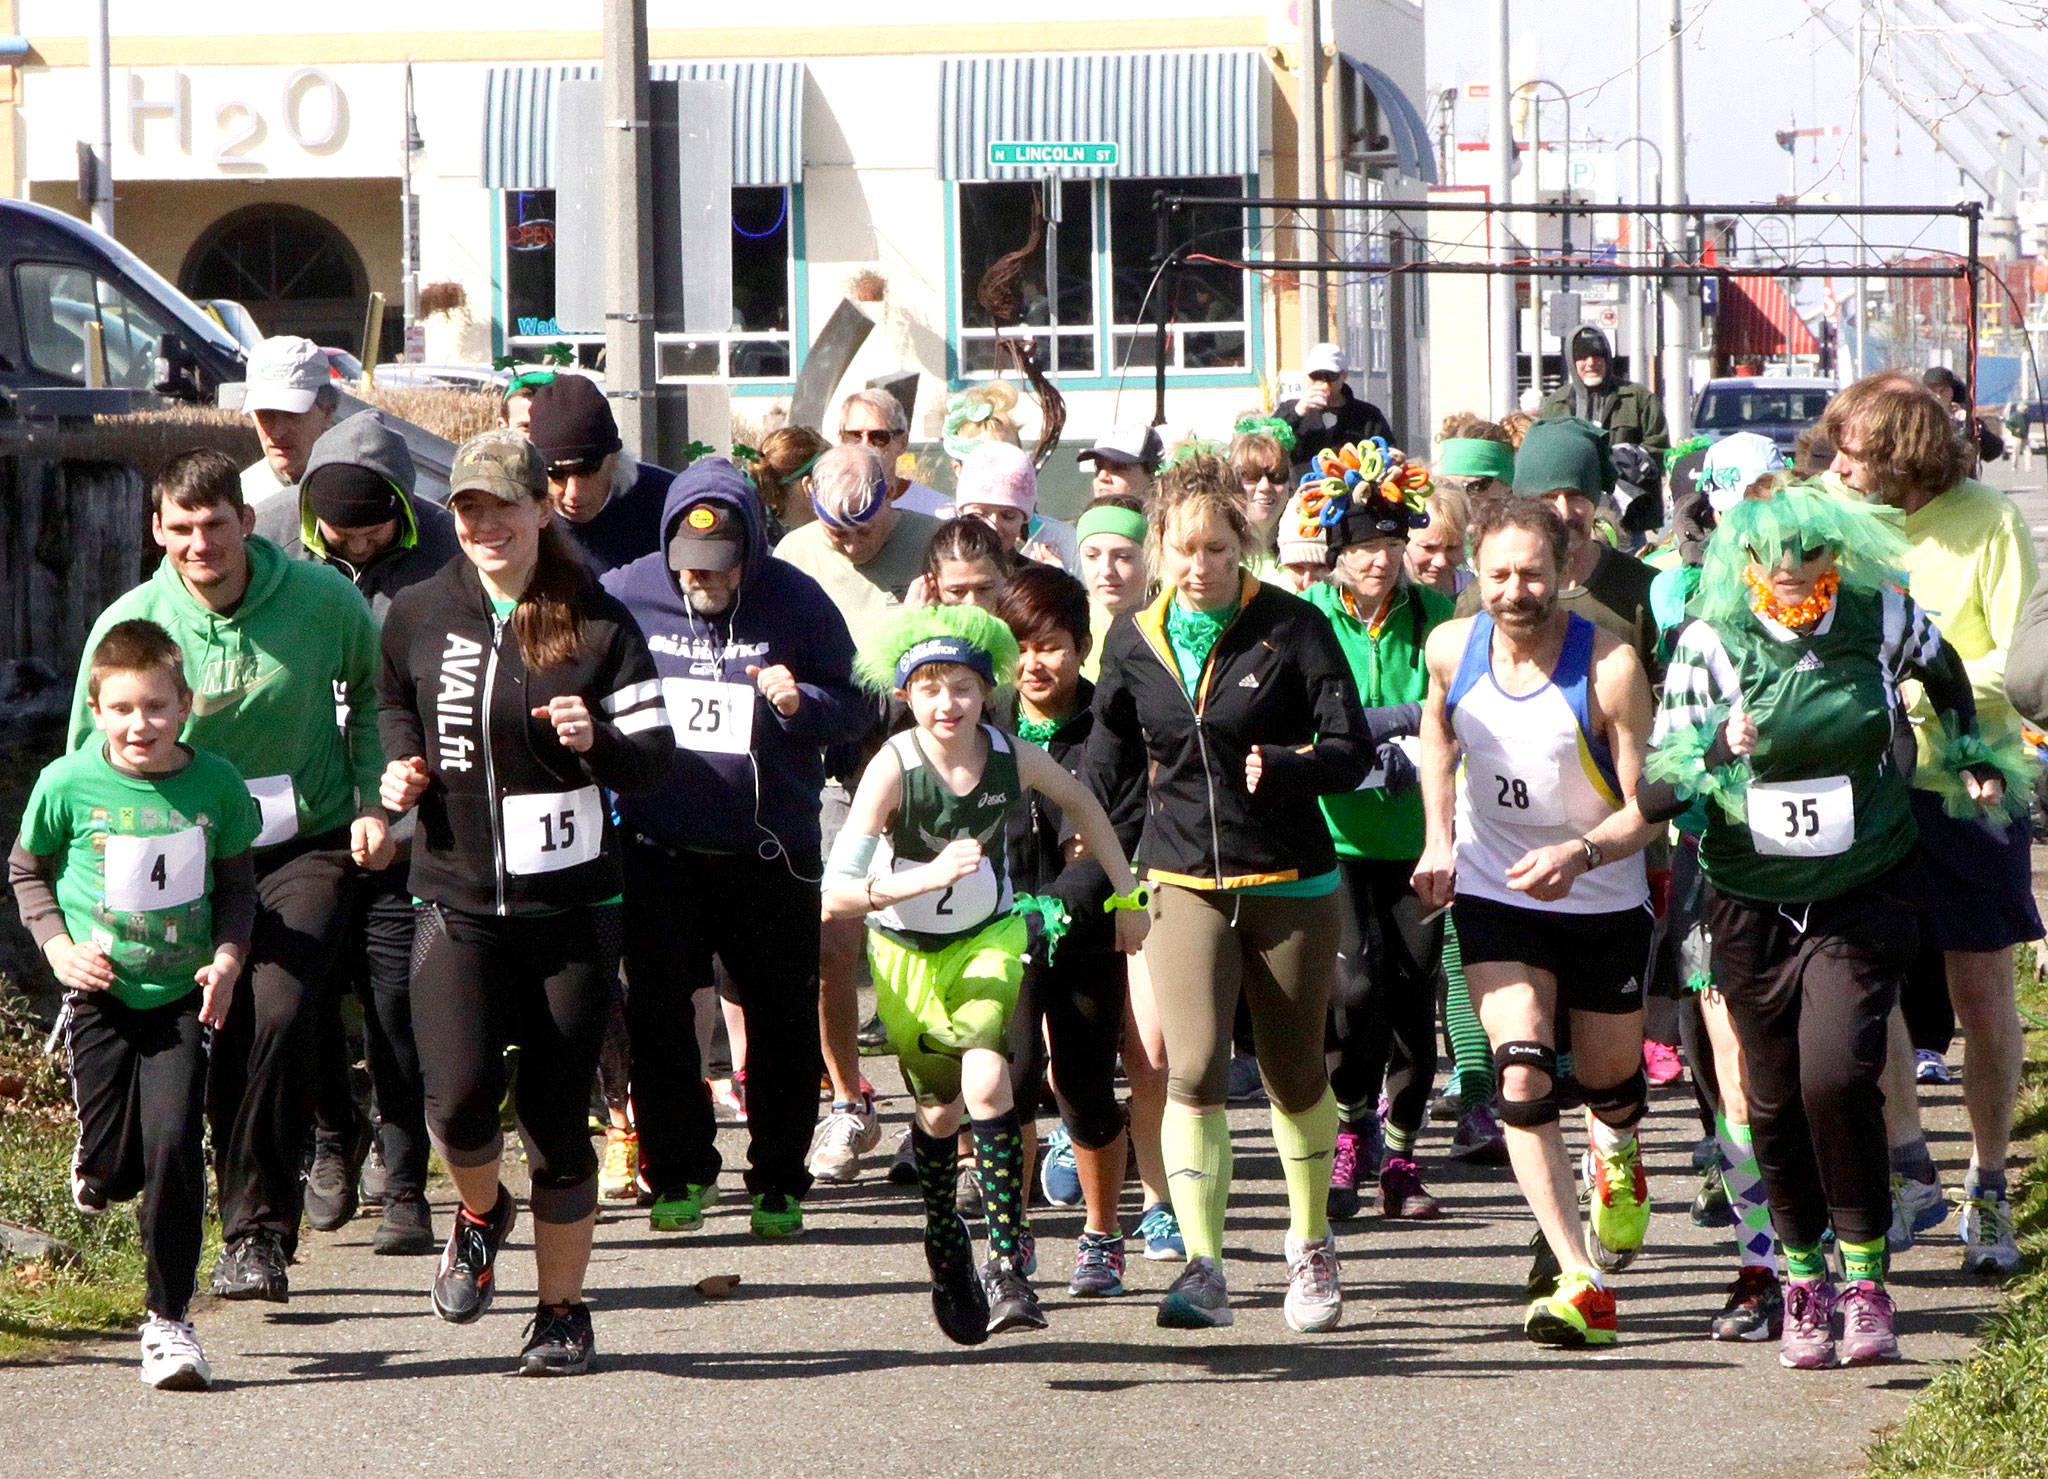 Dave Logan/for Peninsula Daily News                                They’re off and running at the annual St. Patrick’s Day Fun Run, sponsored by the Port Angeles Parks and Recreation Department. Justover 50 peoplew and a dog ran the 5K course along the Port Angeles waterfront starting at the City Pier. It was a cold and windy runbut the effort of running kept them warm. From left, are Zeke Gould (4), Mike Gould (10), Leah Gould (15), David Doran (25), EastonDempsey (2), winner Dave Lasorsa (28) and Ginny Sturgeon (35).